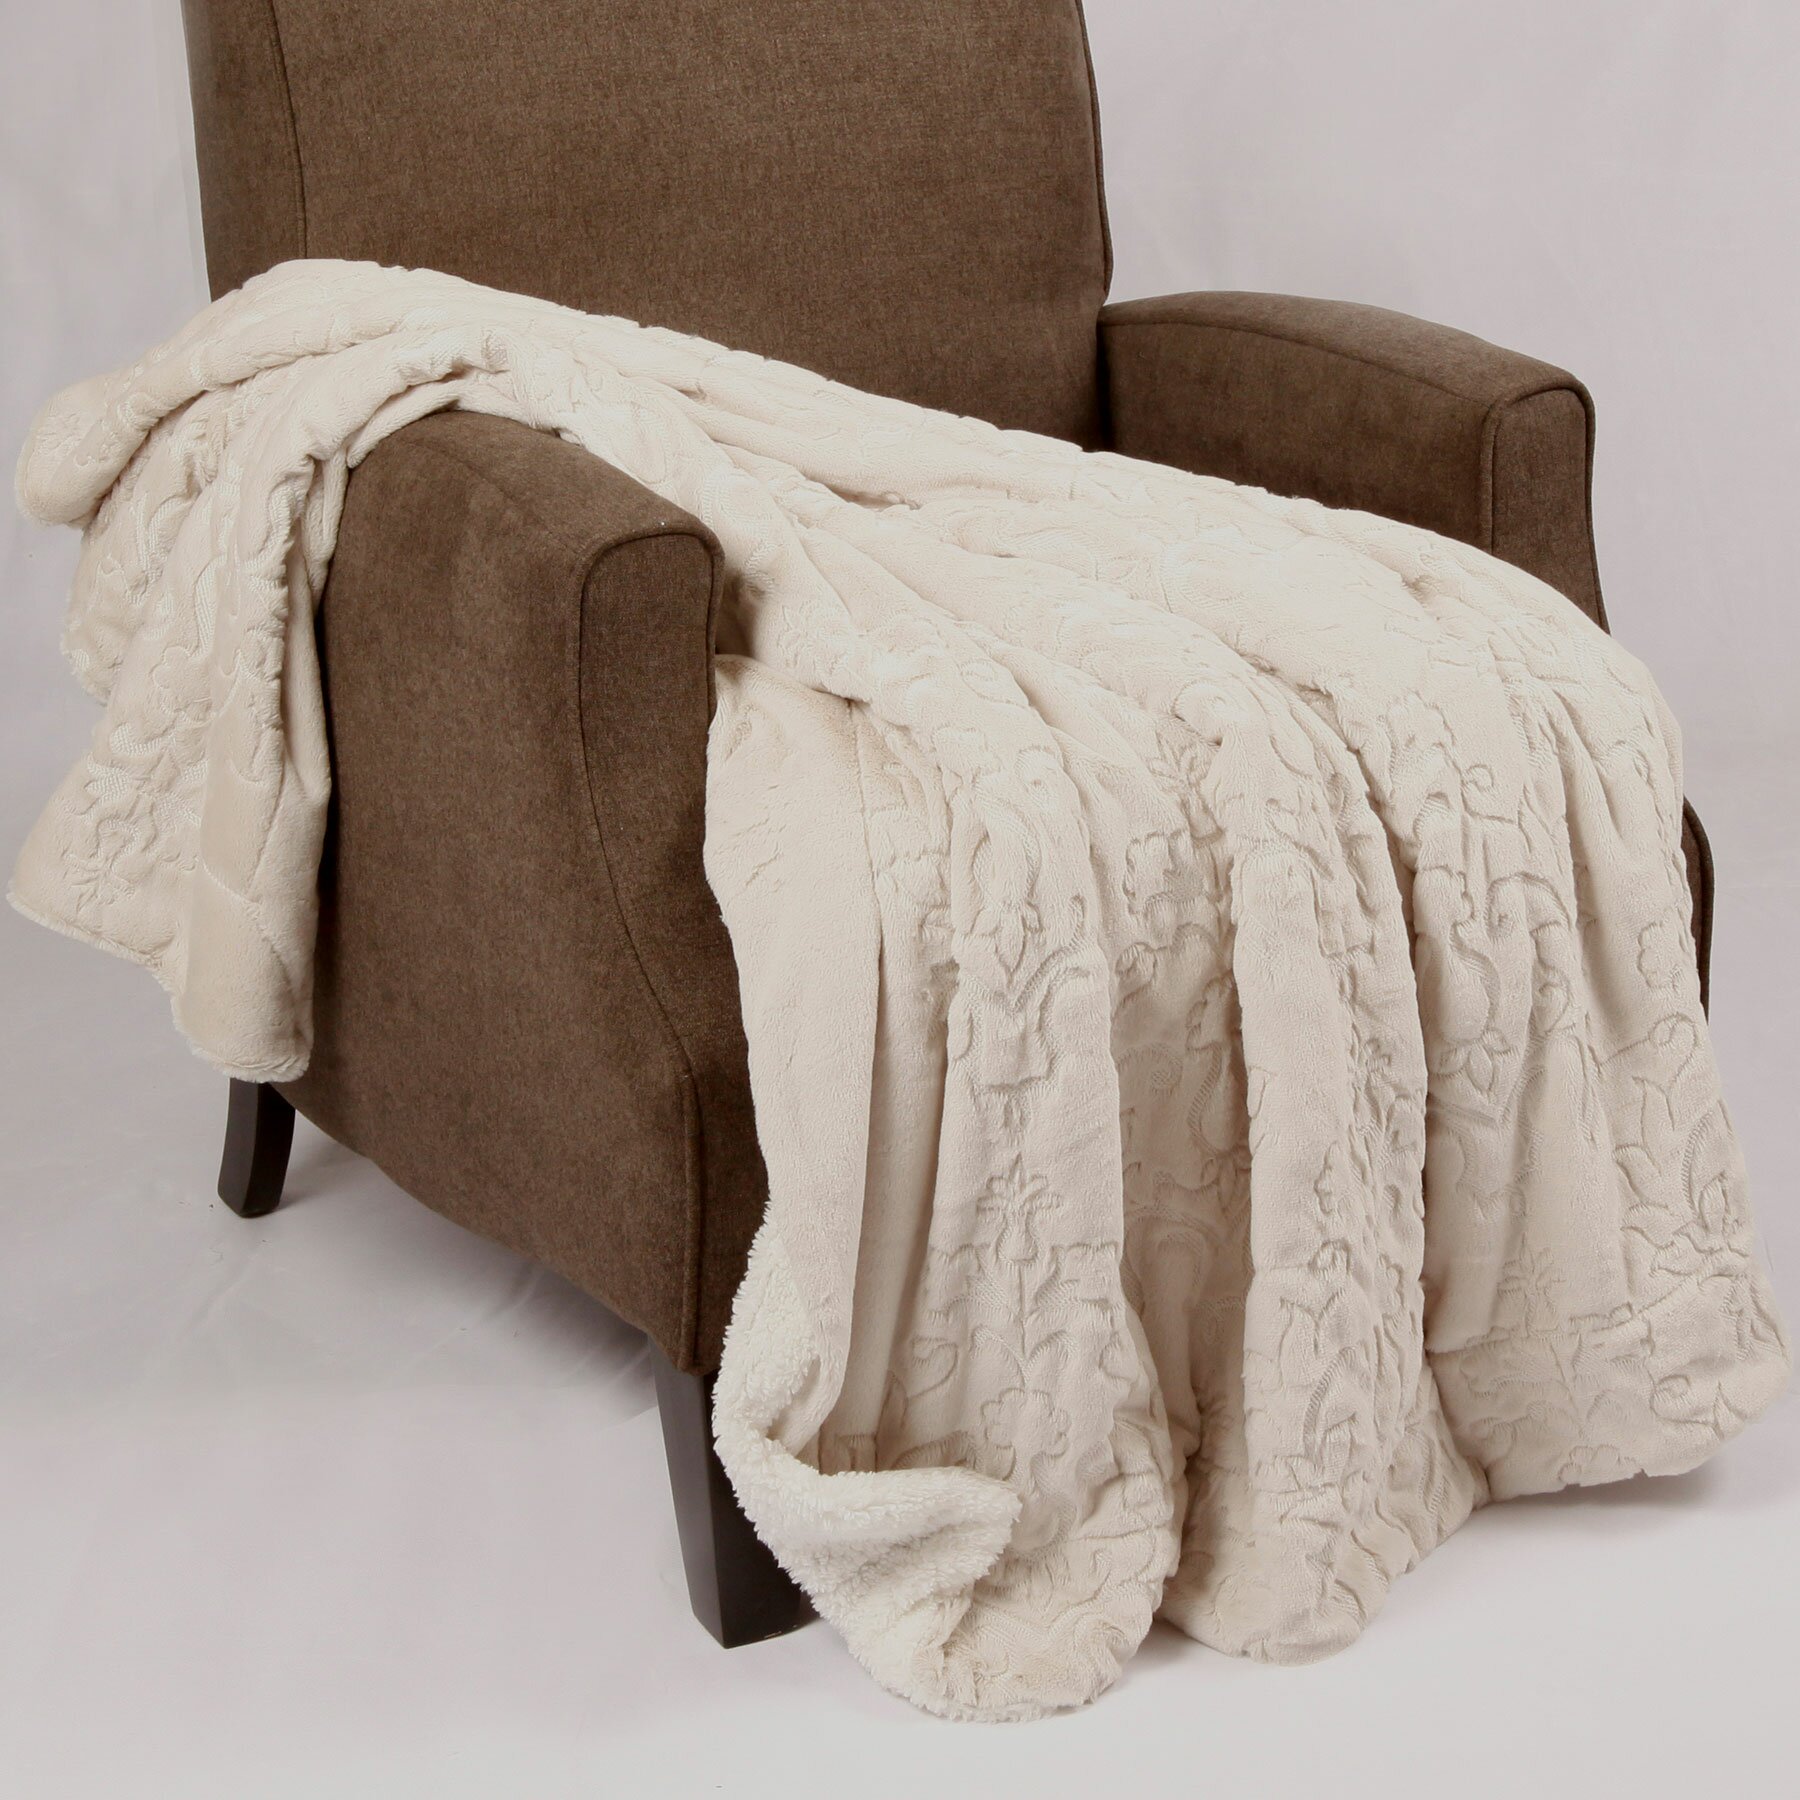 Boon Throw And Blanket Batik Faux Fur Sherpa Throw Blanket And Reviews